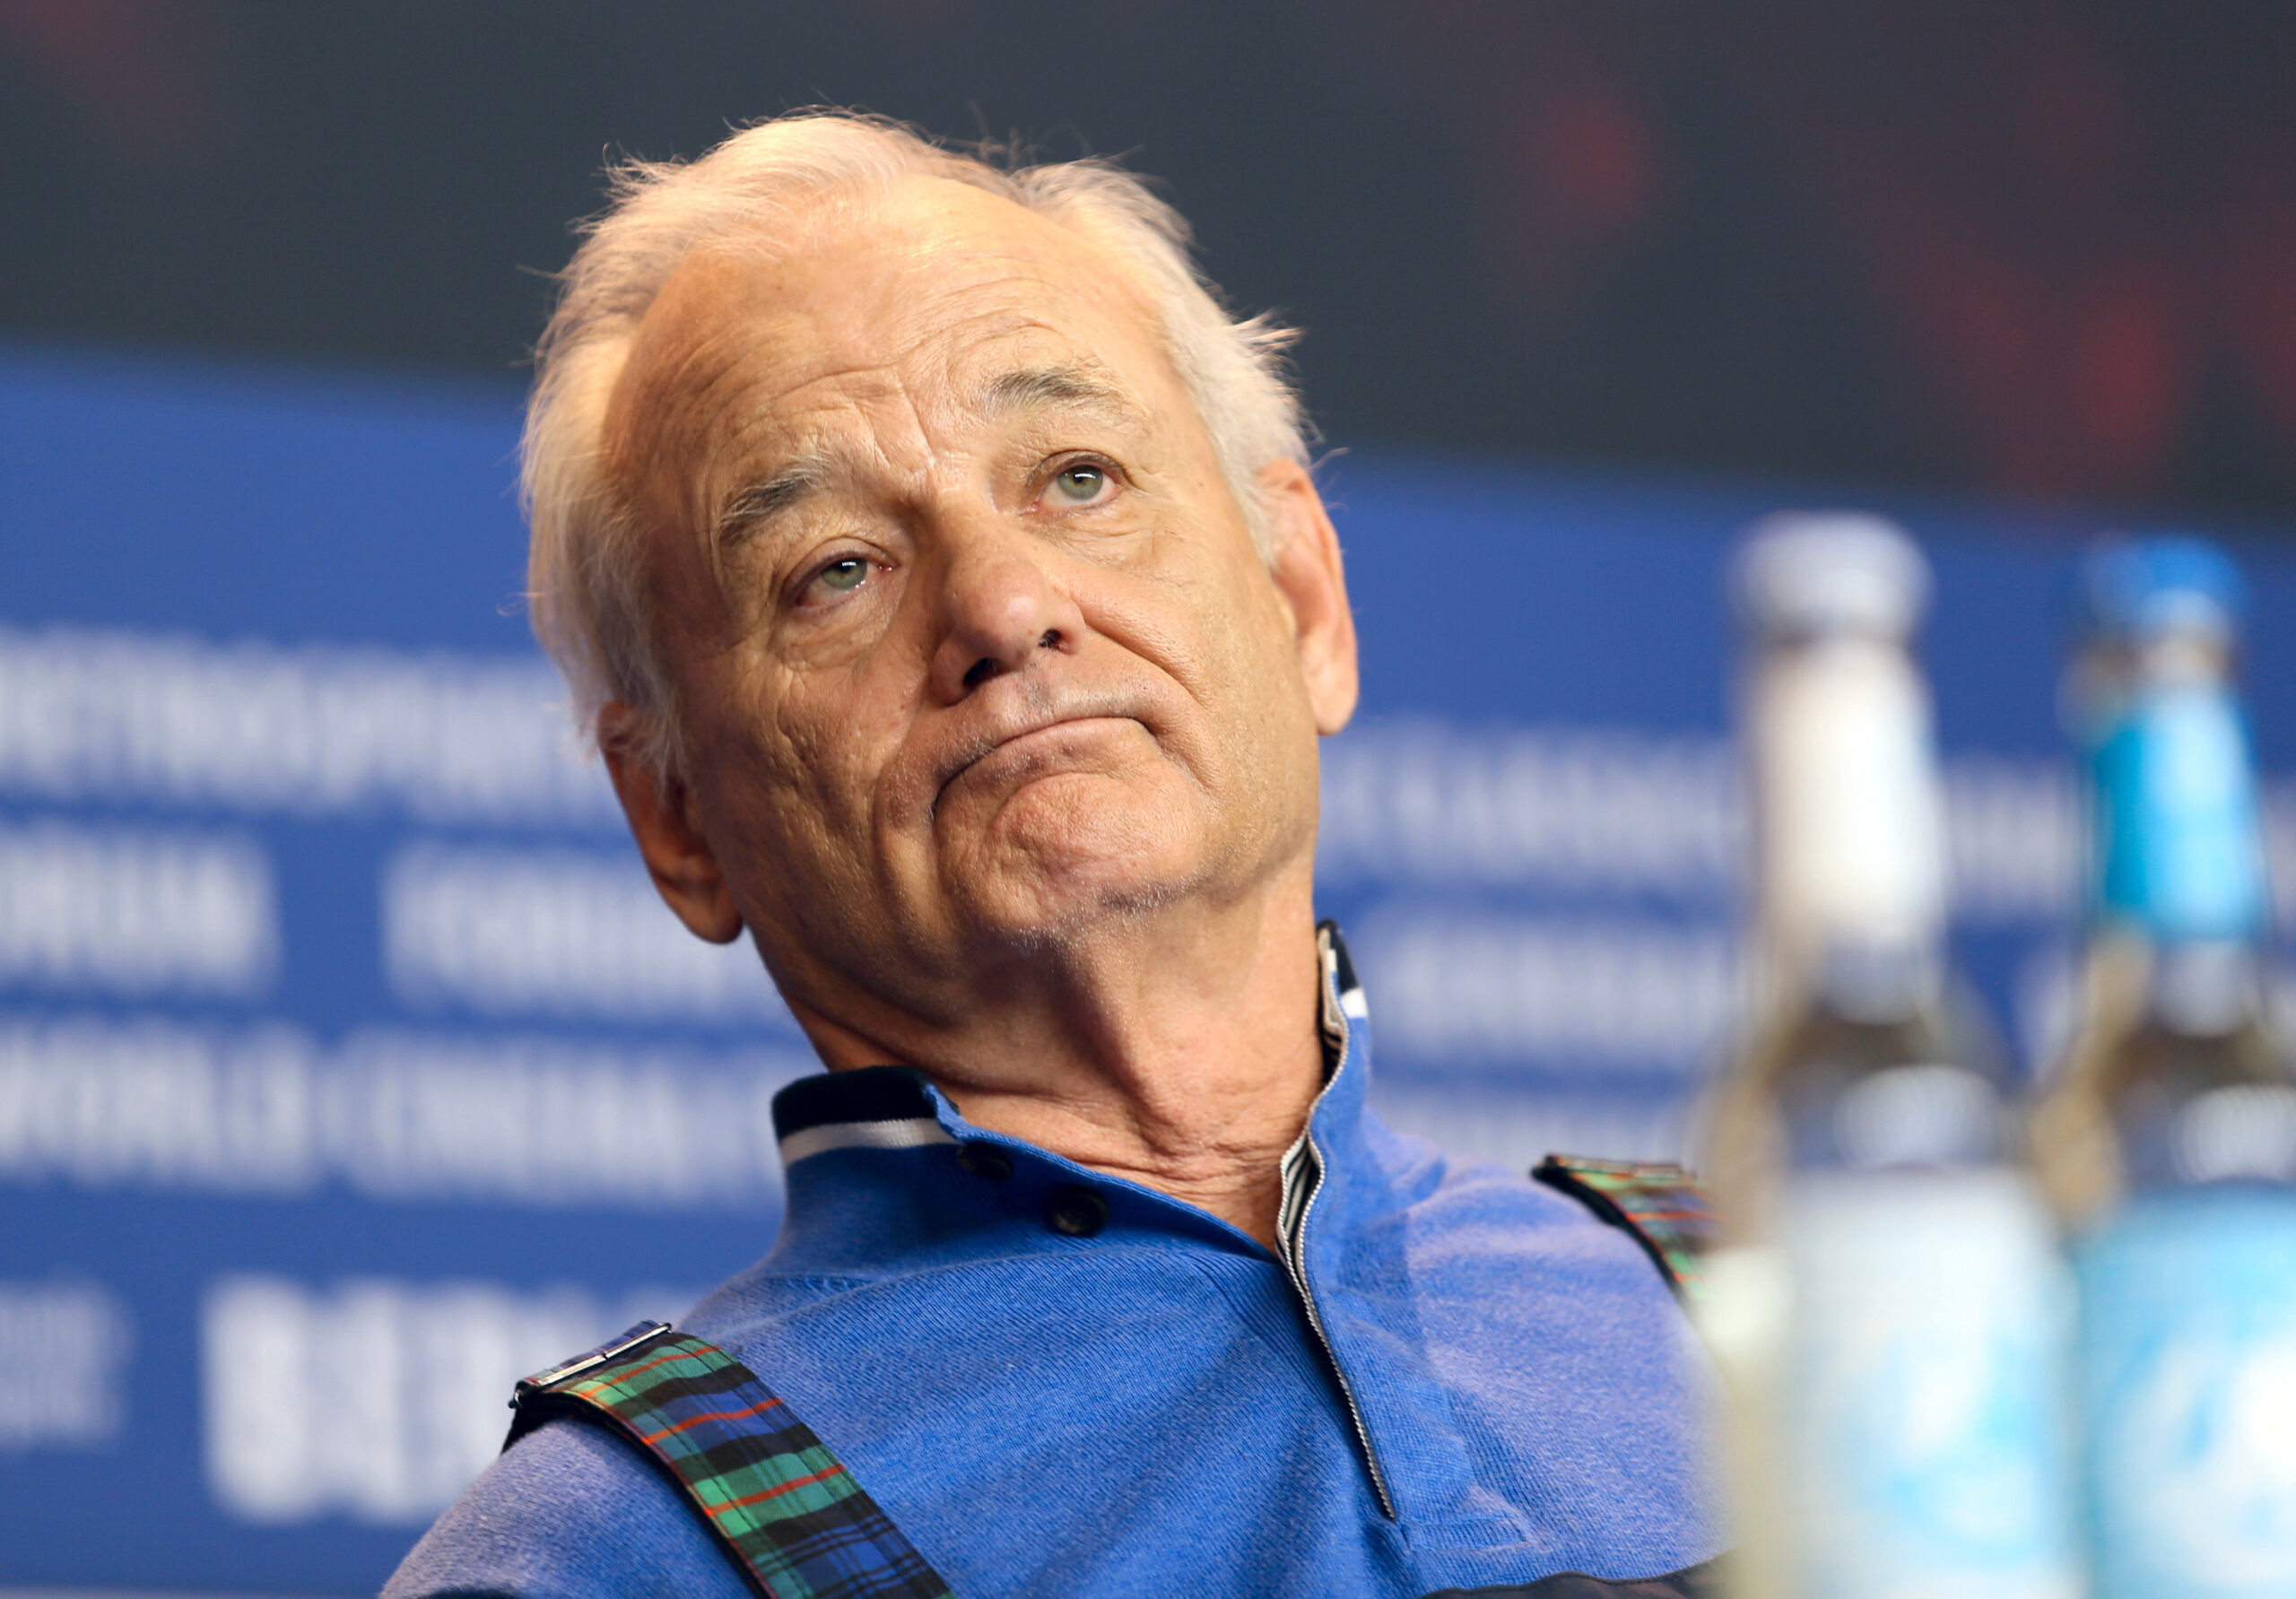 Bill Murray for House Speaker? One congressman is pitching the idea